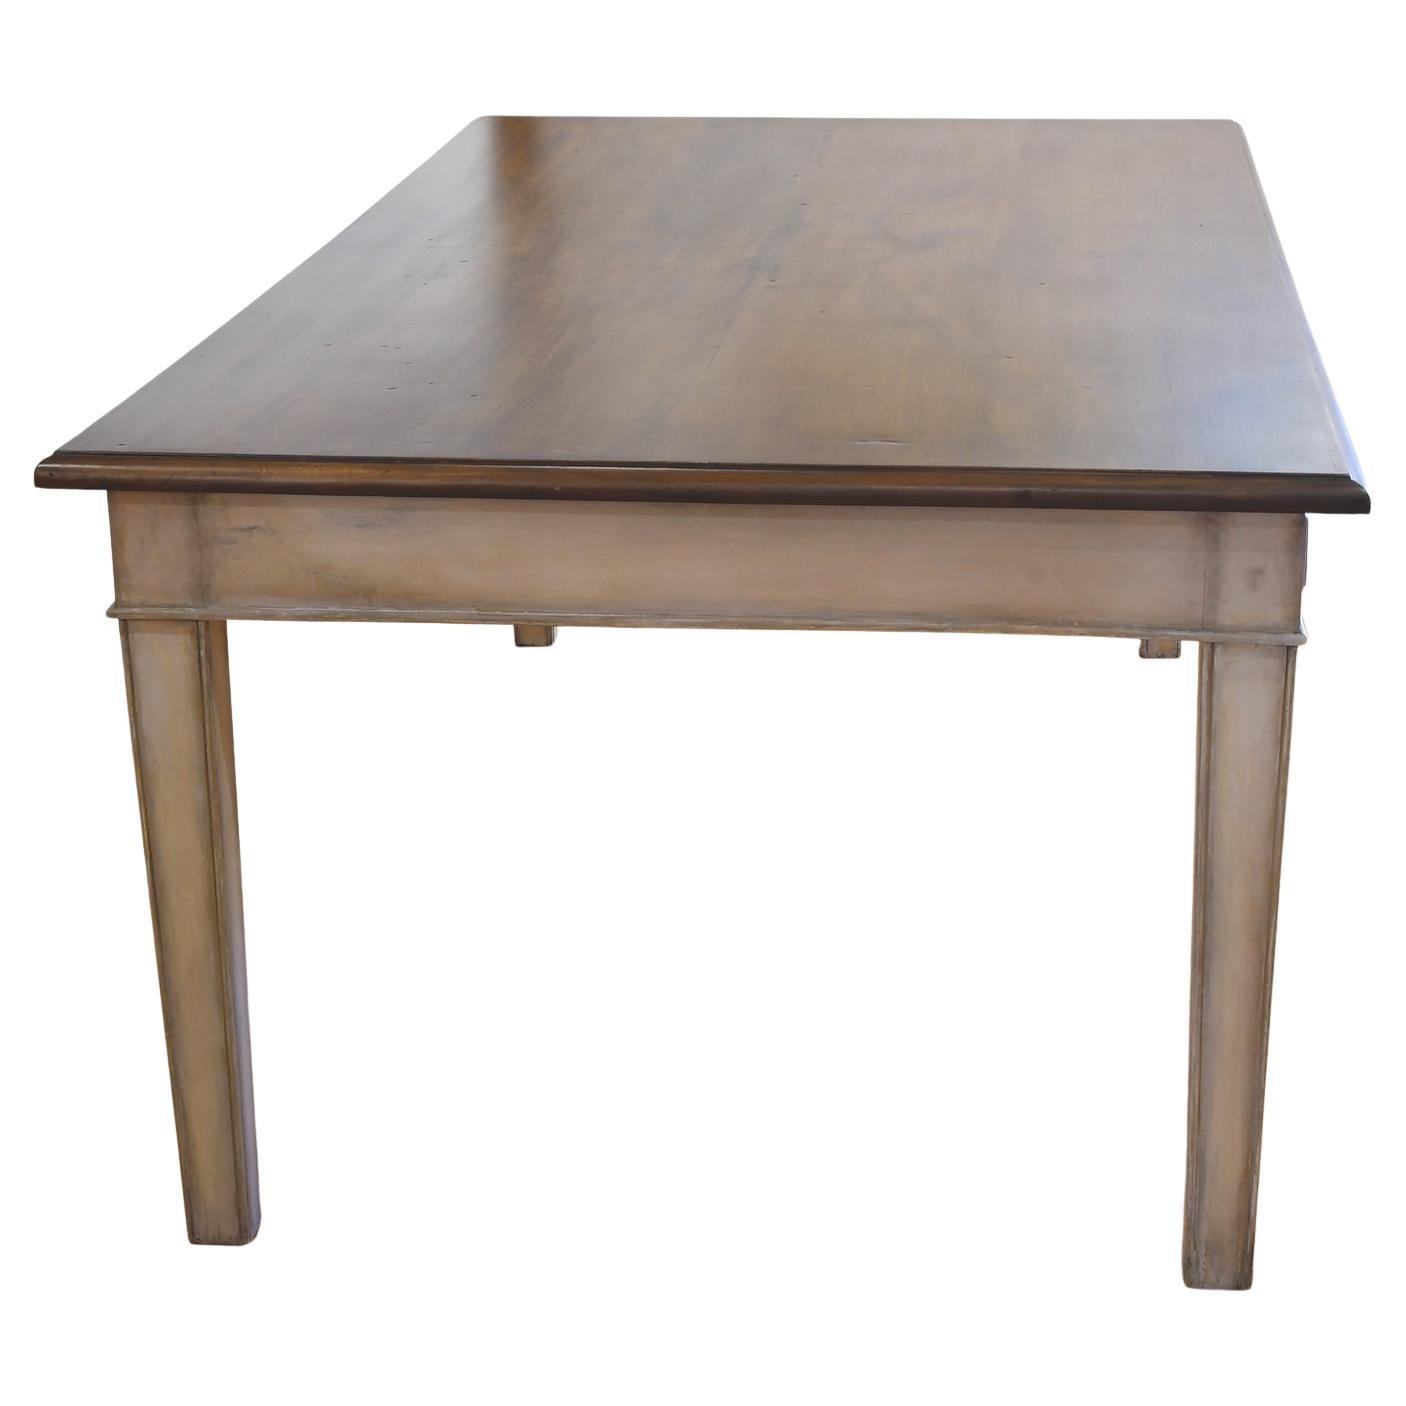 20th Century Antique Gustavian-Style Grey-Painted Dining Table w/ Dark Faux-Bois Grained Top For Sale